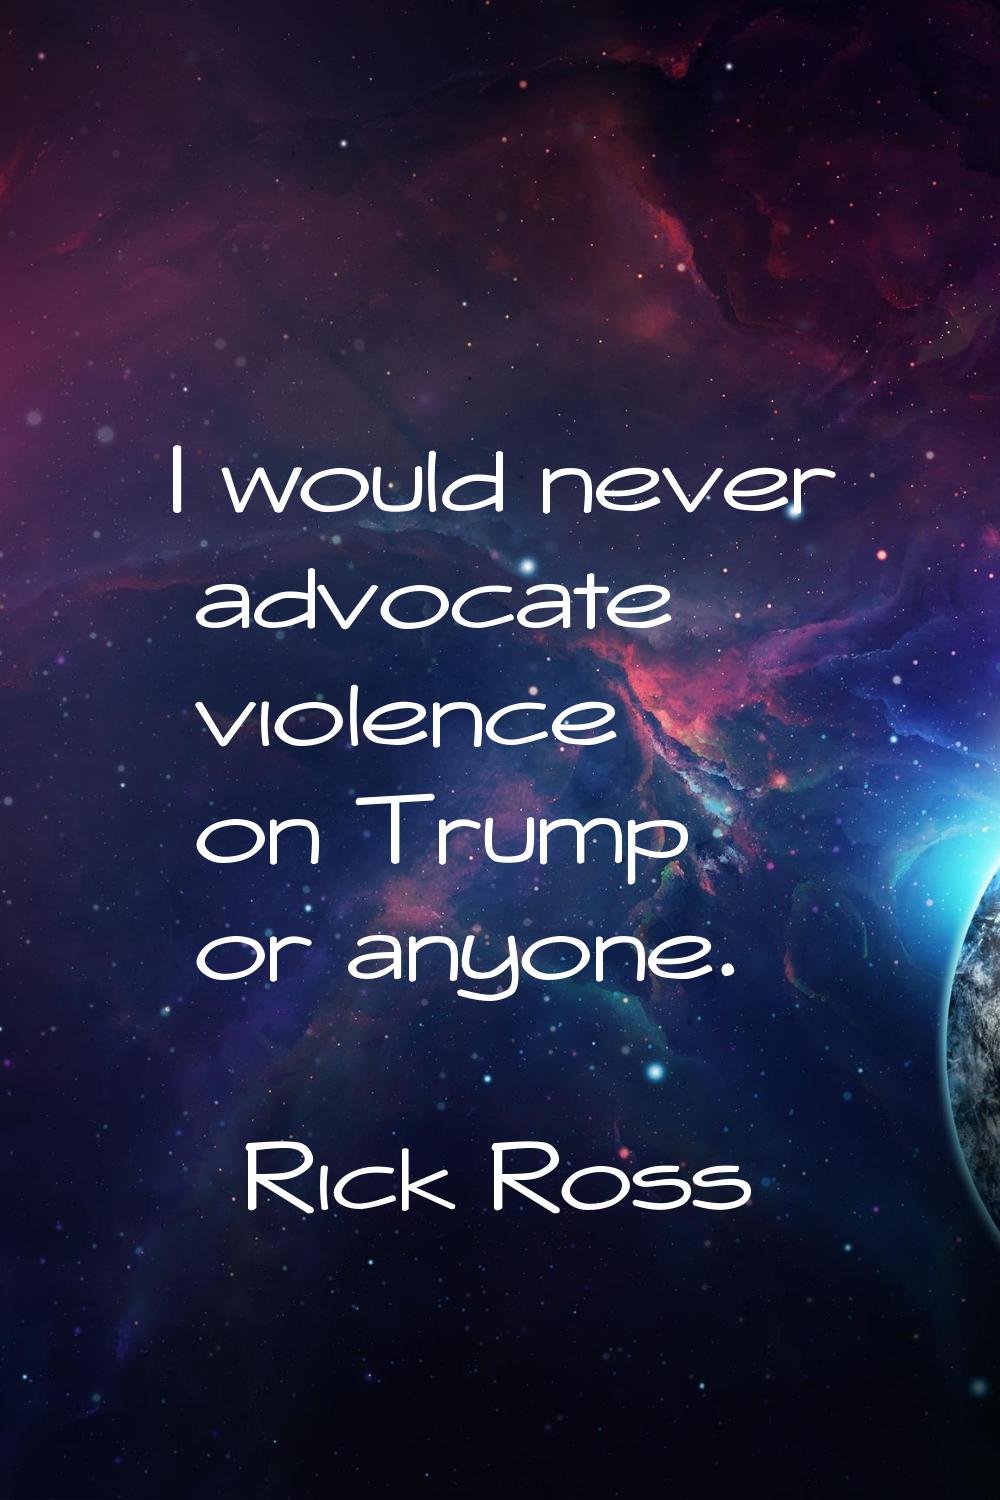 I would never advocate violence on Trump or anyone.